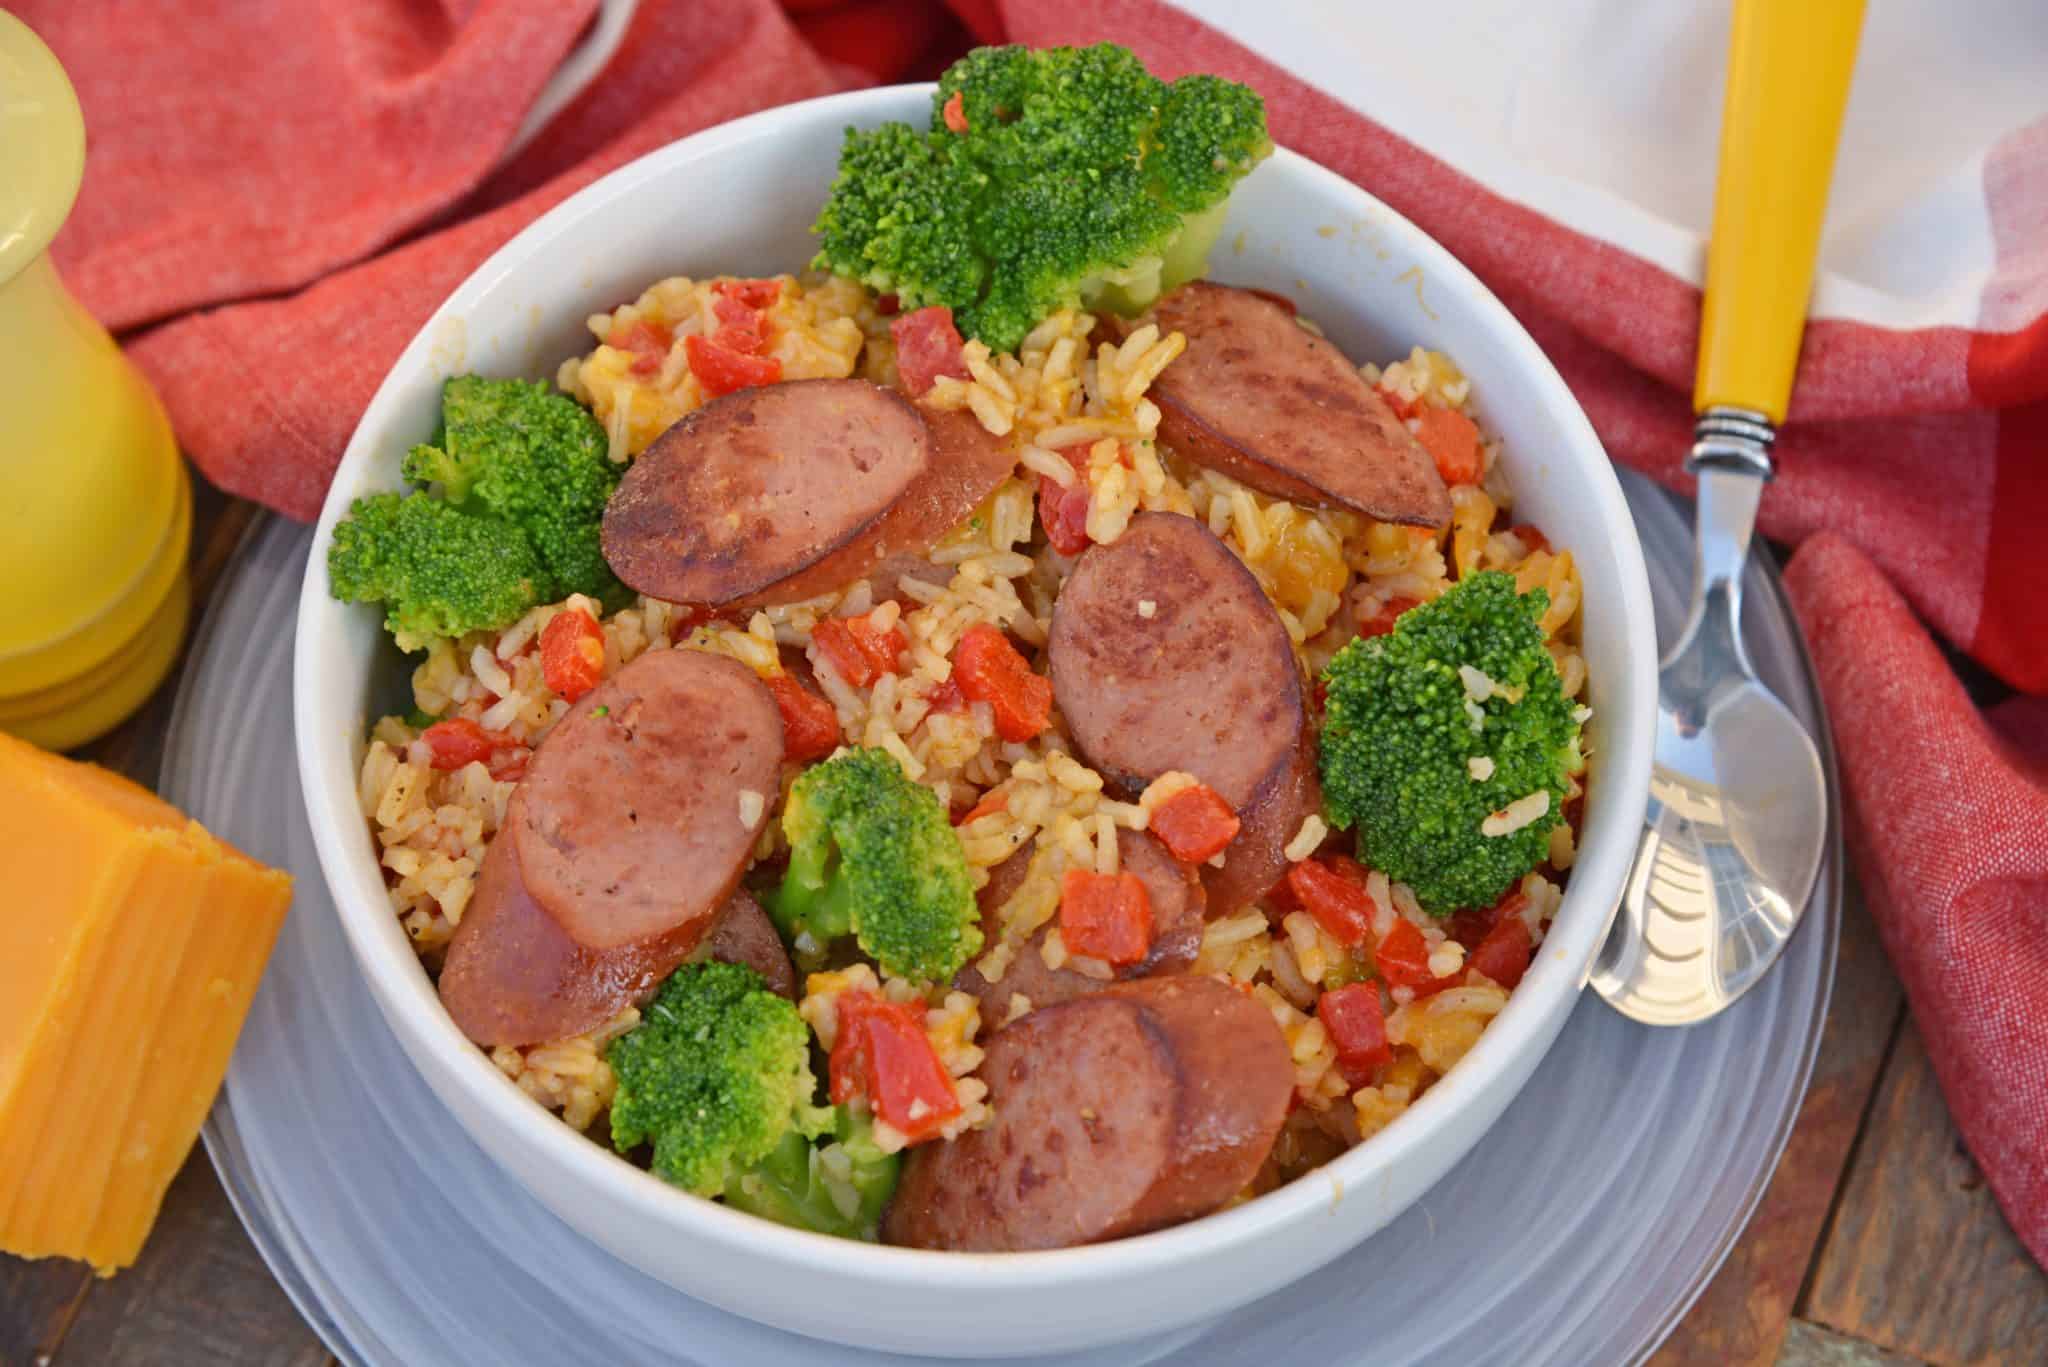 Sharp cheddar cheese tossed with rice, broccoli florets, roasted red pepper and tender Eckrich Smoked Sausage. Dinner is ready in just 15 minutes! #easydinnerideas #skilletmeals #onepandinner www.savoryexperiments.com 